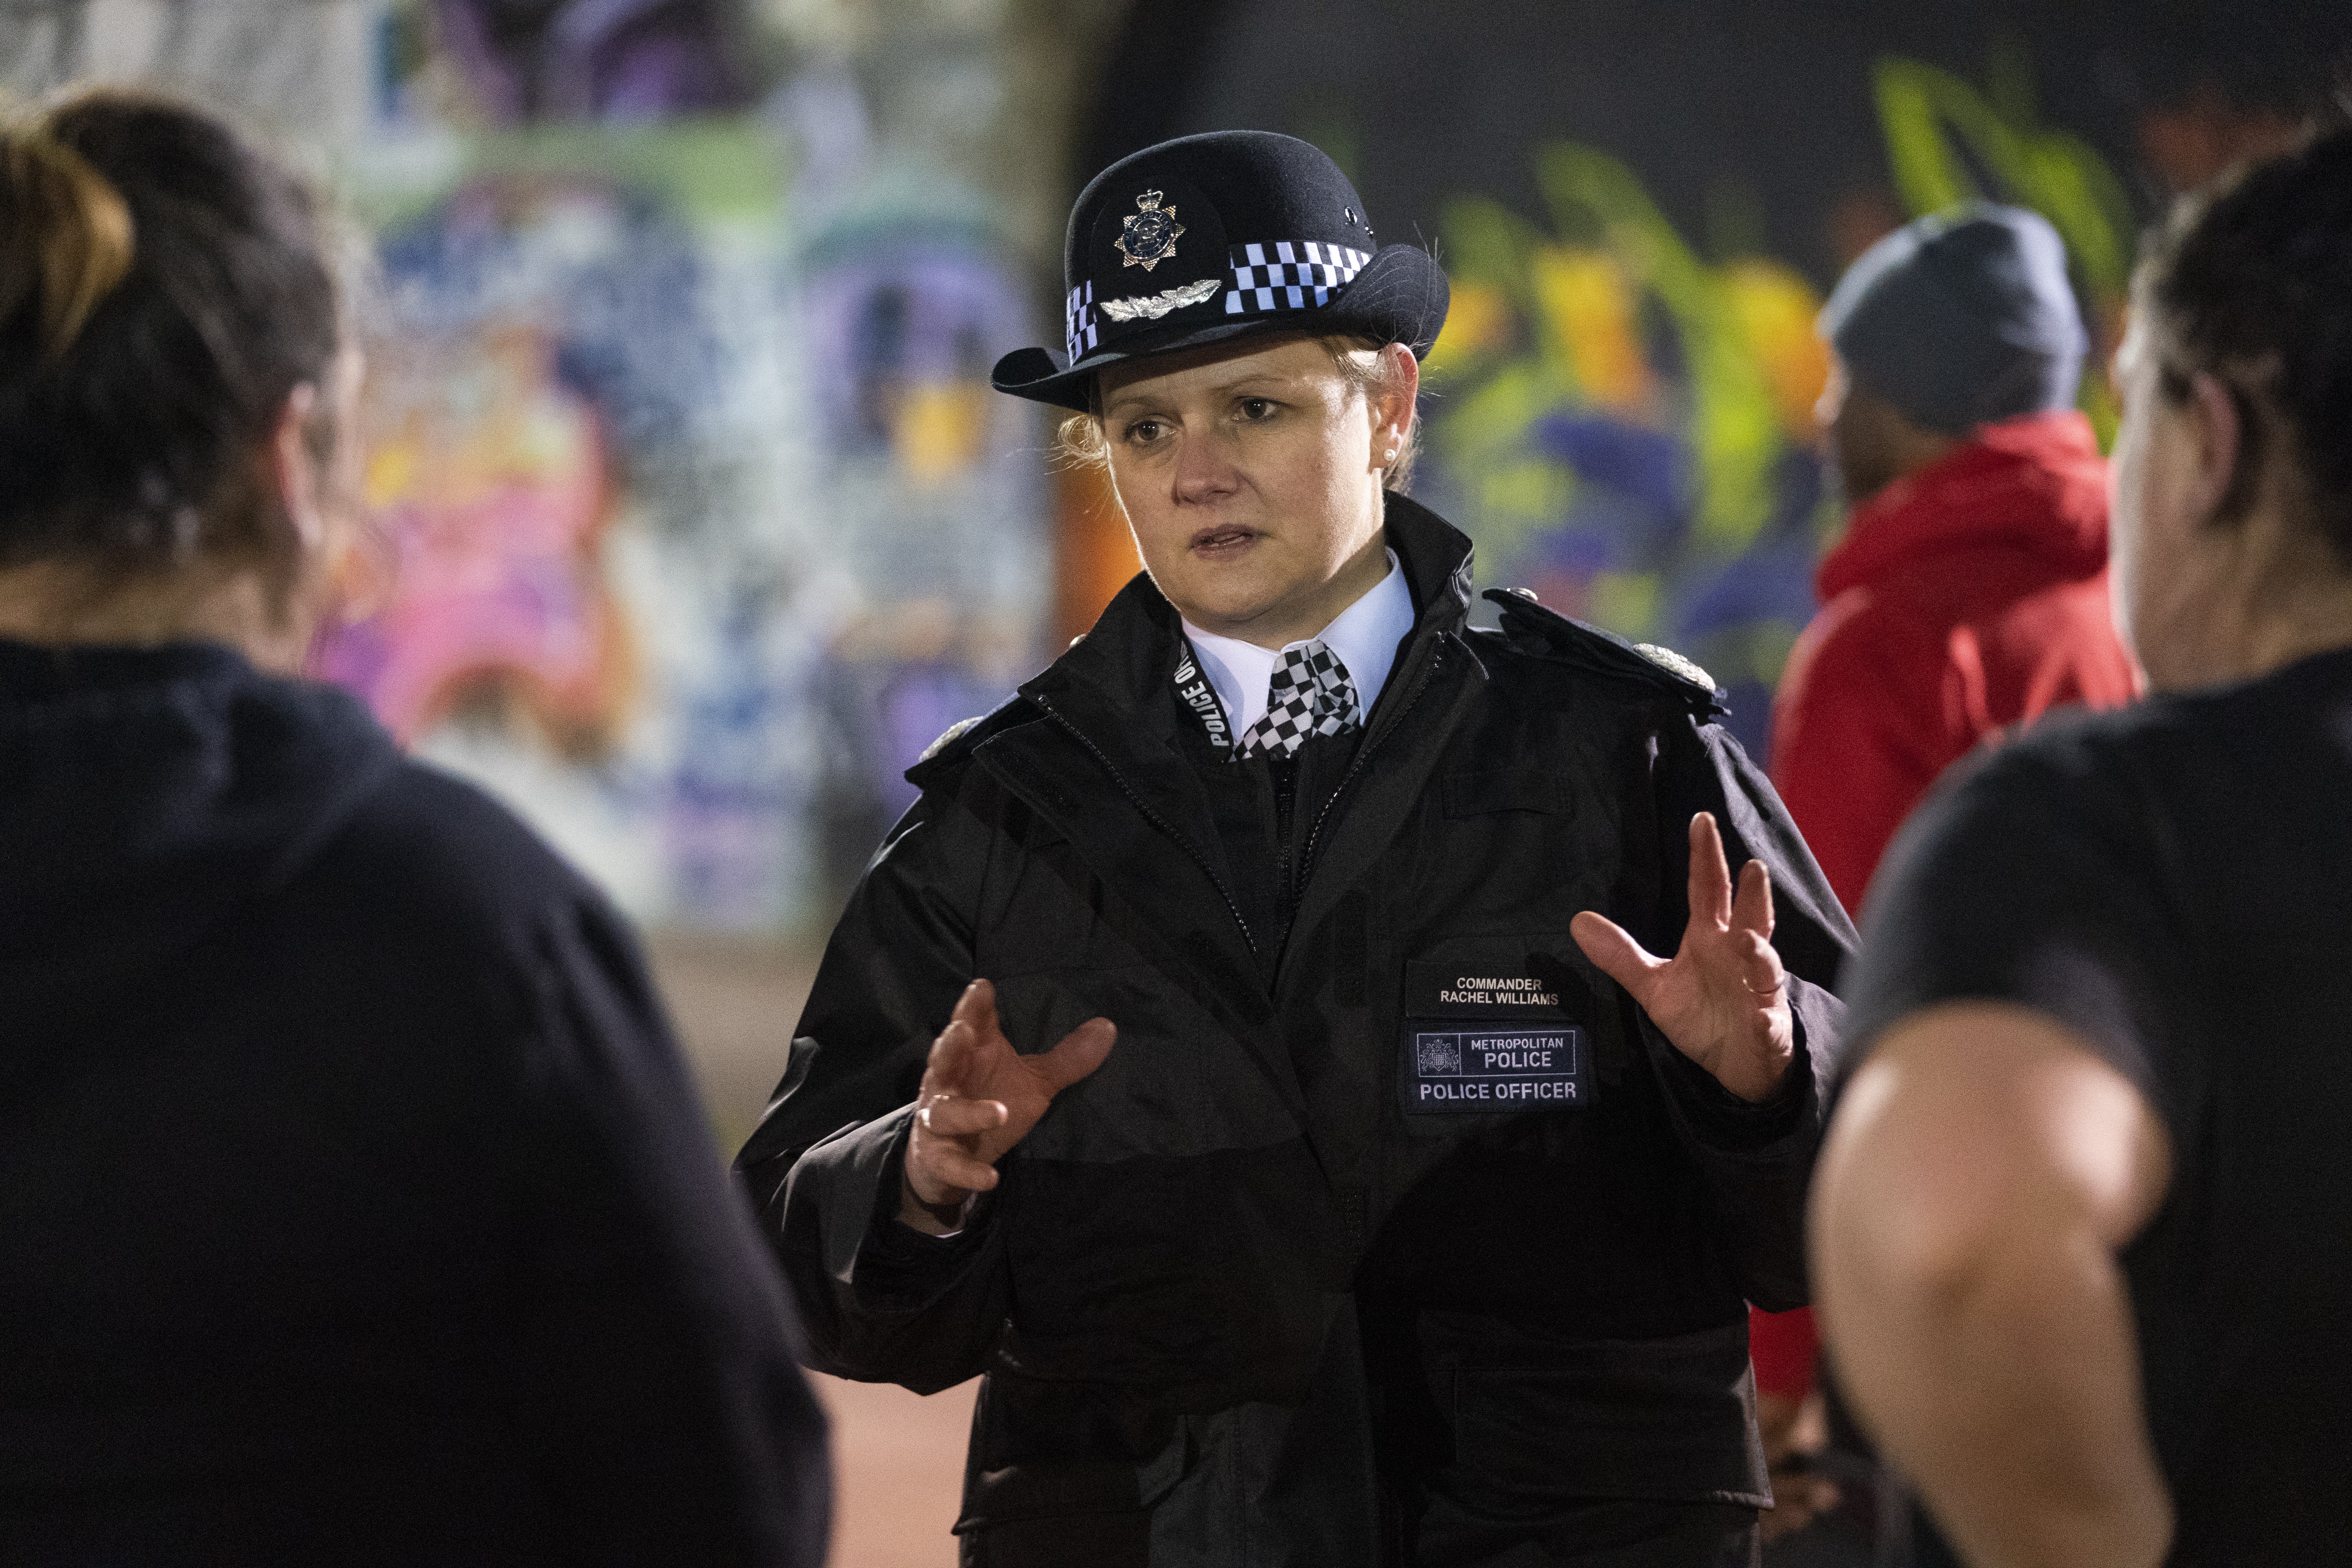 Commander Rachel Williams speaks to women during a “walk and talk” in Peckham ahead of the scheme’s rollout across London on March 8 (Kirsty O’Connor/PA)